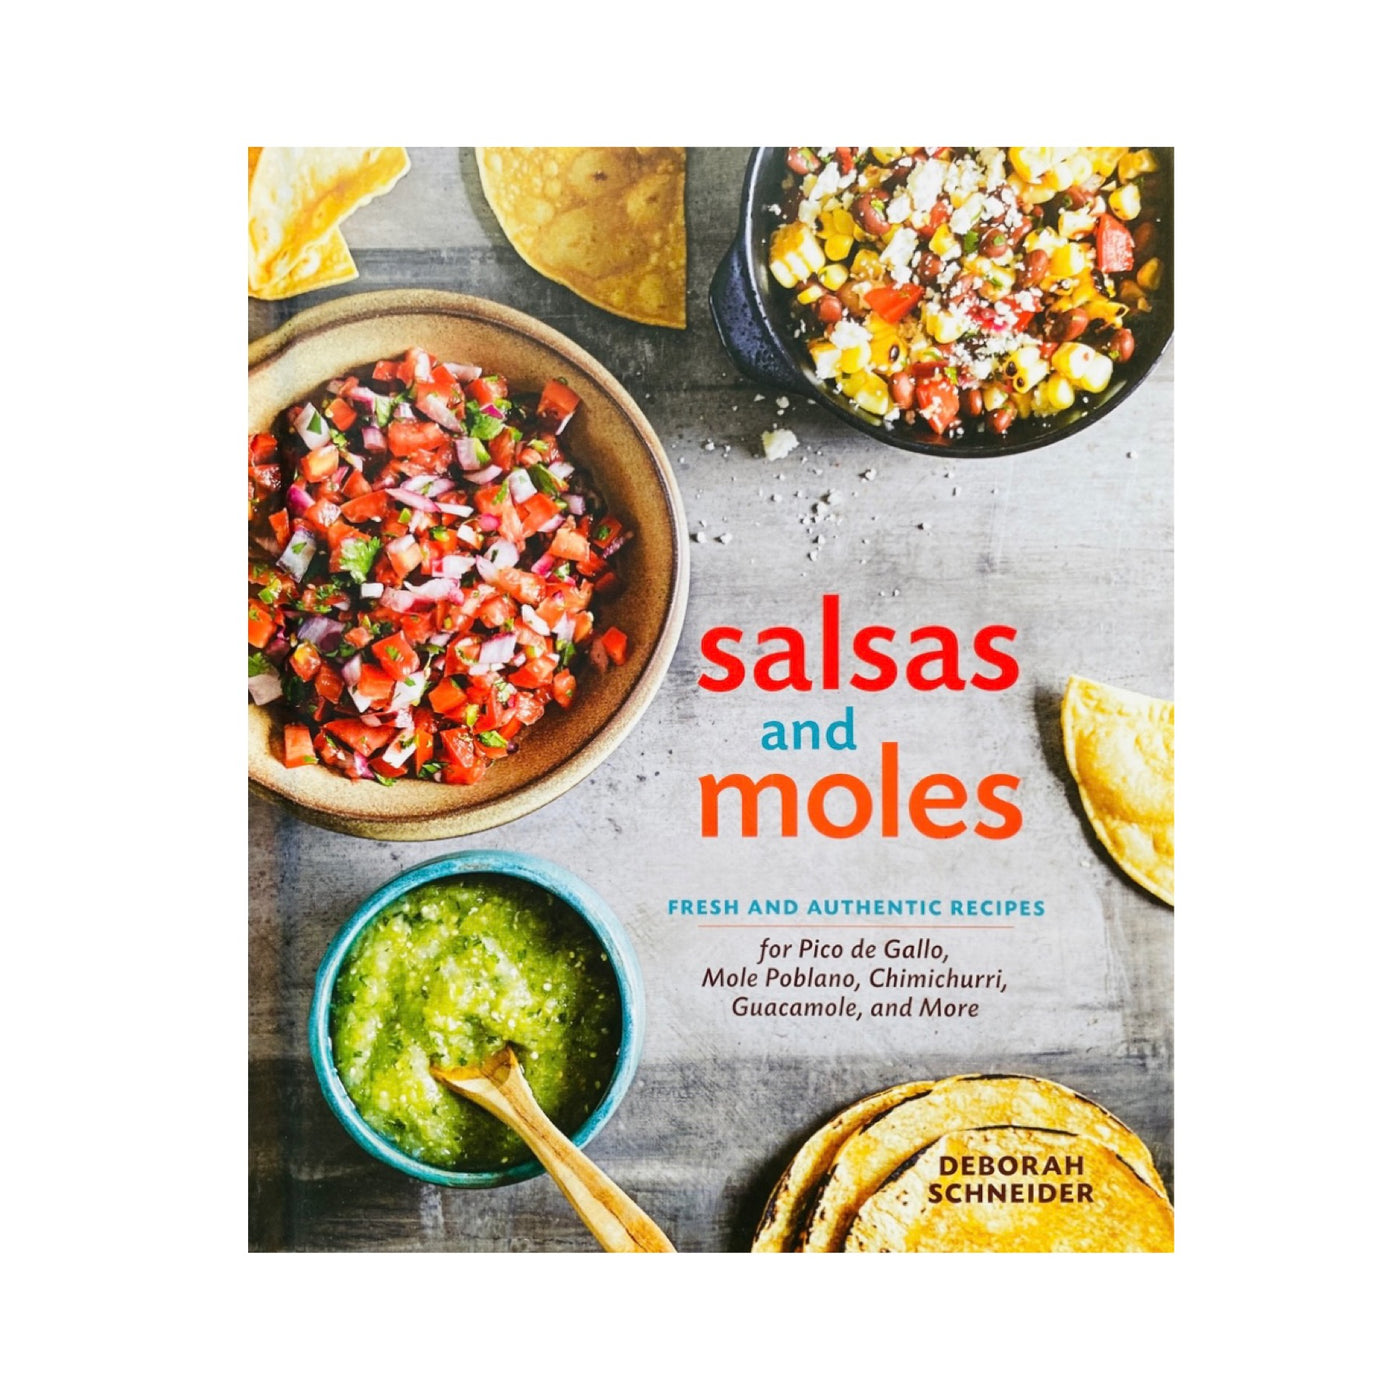 Front cover of Salsas and Moles cookbook by Deborah Schneider. The cover art is a top view photograph of three different bowls of salsa with tortilla chips.